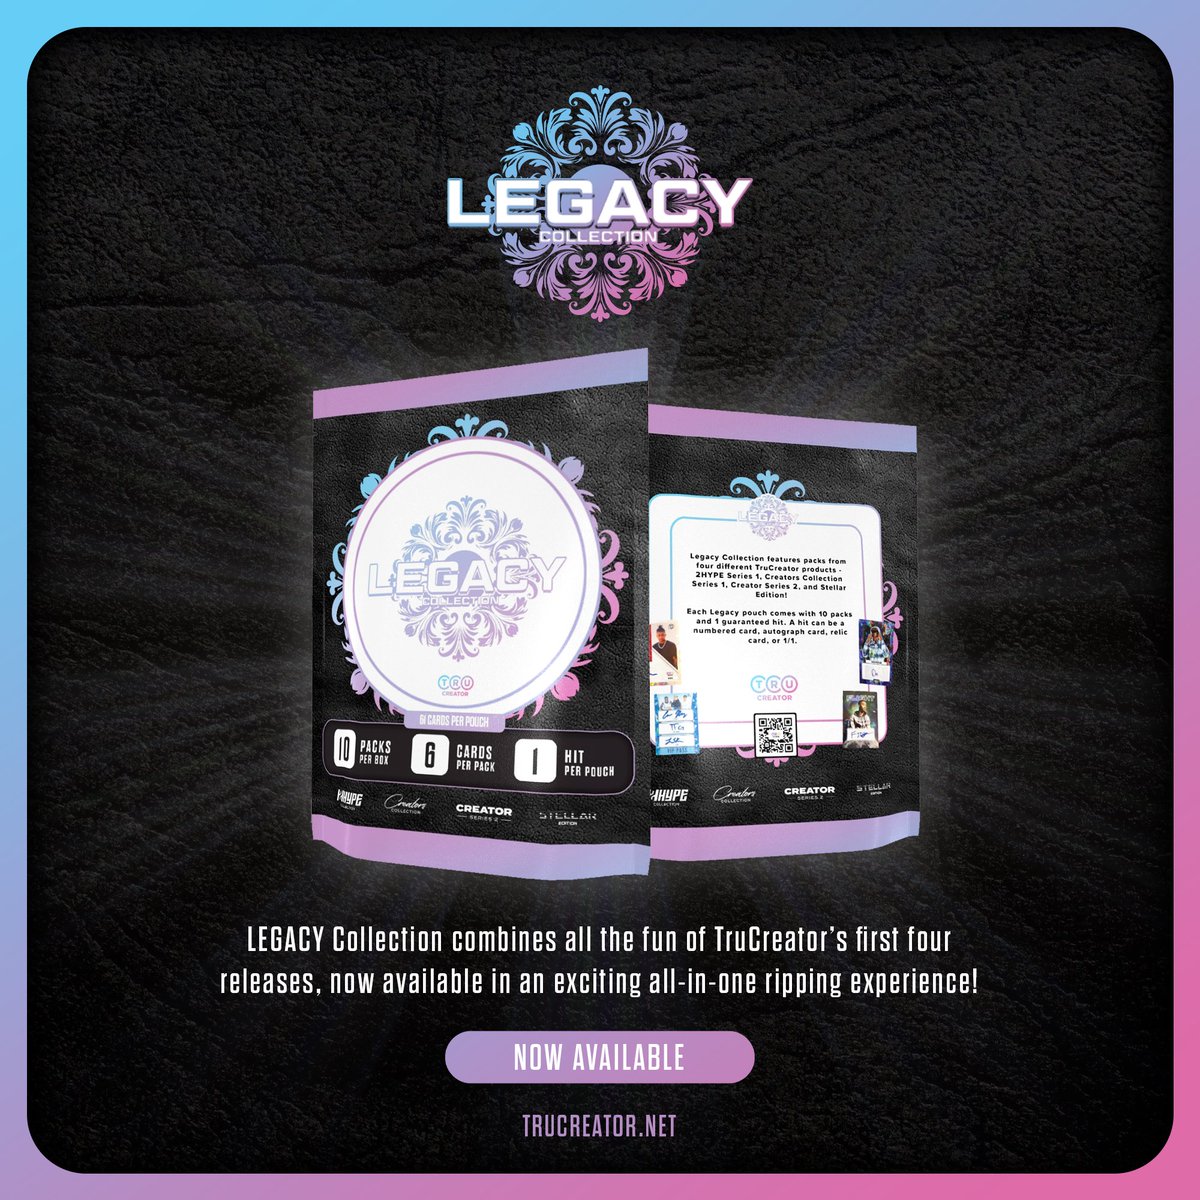 Chase all of the best TruCreator hits all at once - Legacy Collection is here! 🔥 Each box features packs from 2HYPE Series 1, Creators Collection Series 2, Creator Series 2, and/or Stellar Edition! Available now at TruCreator.net while supplies last ✅ #TruCreator